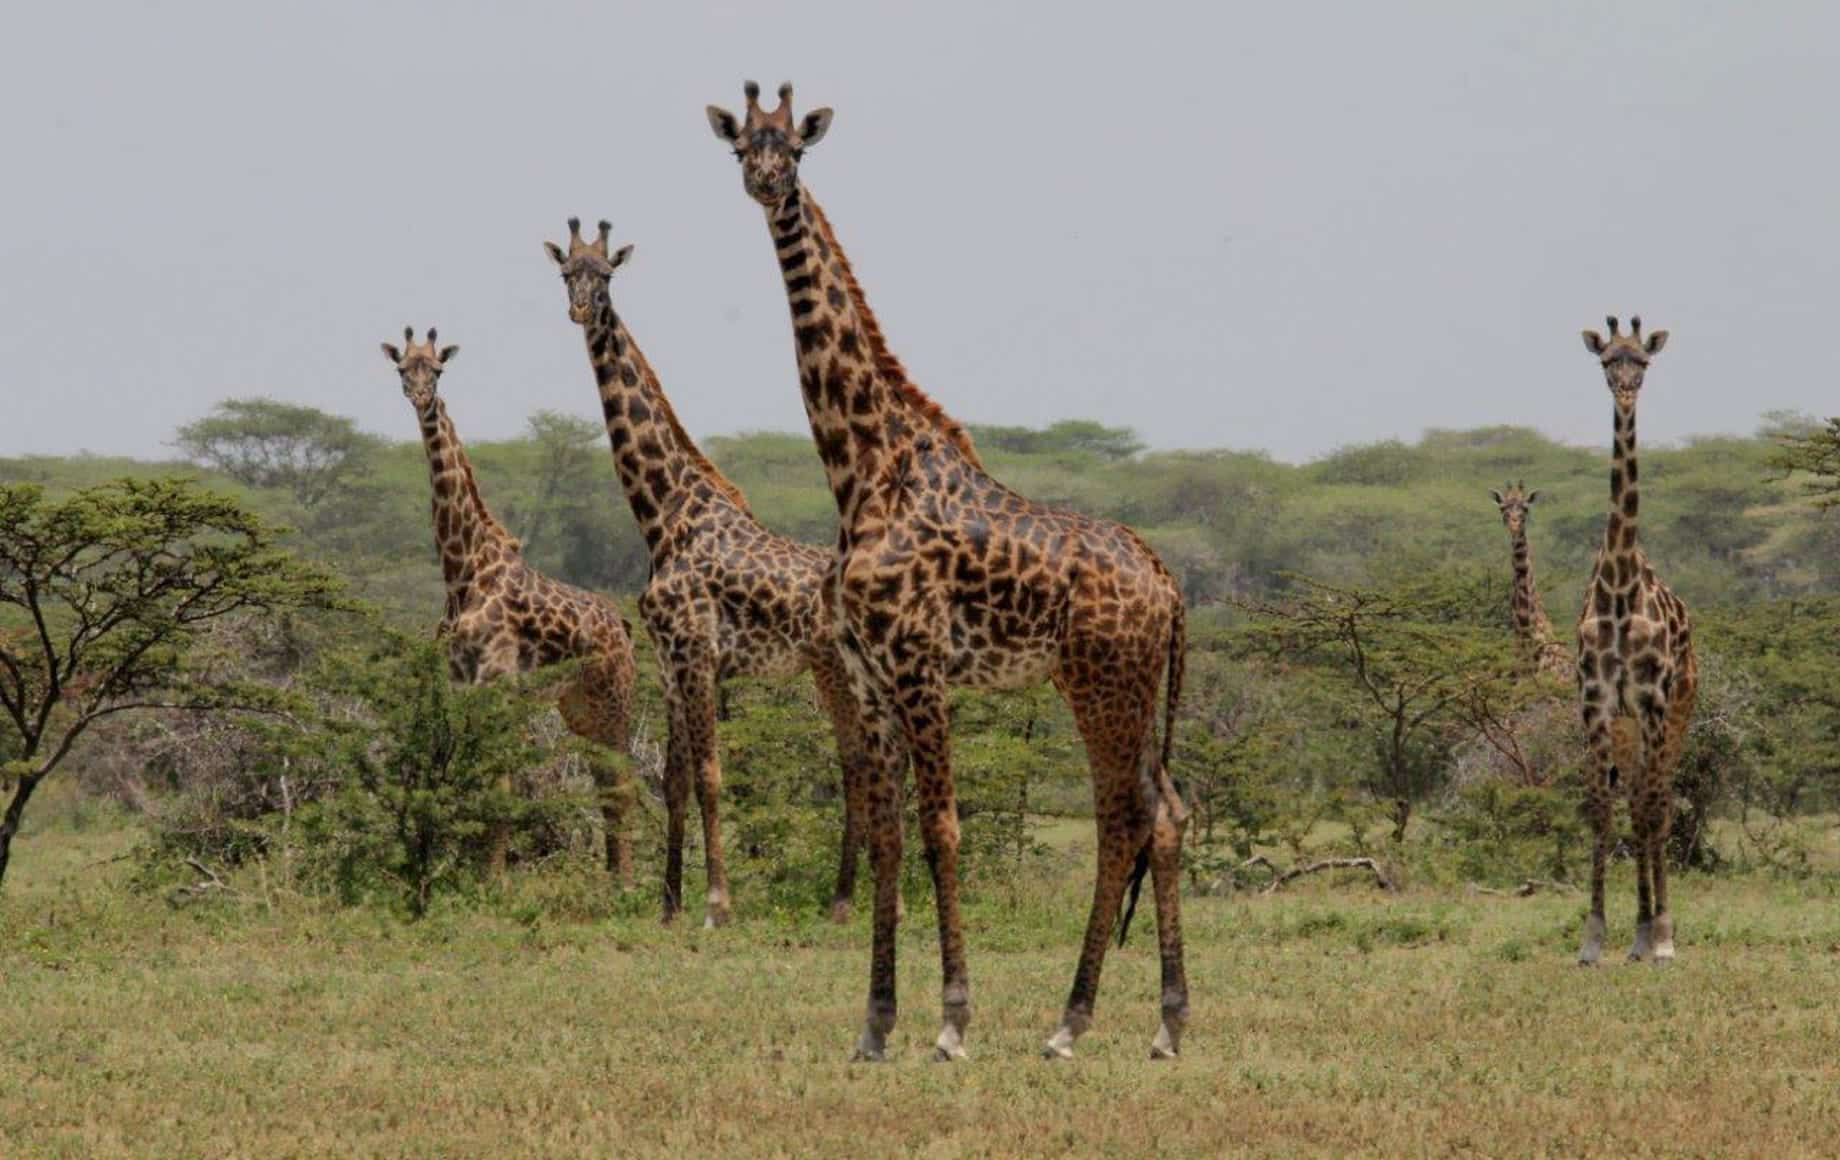 The best places to see giraffes in Africa